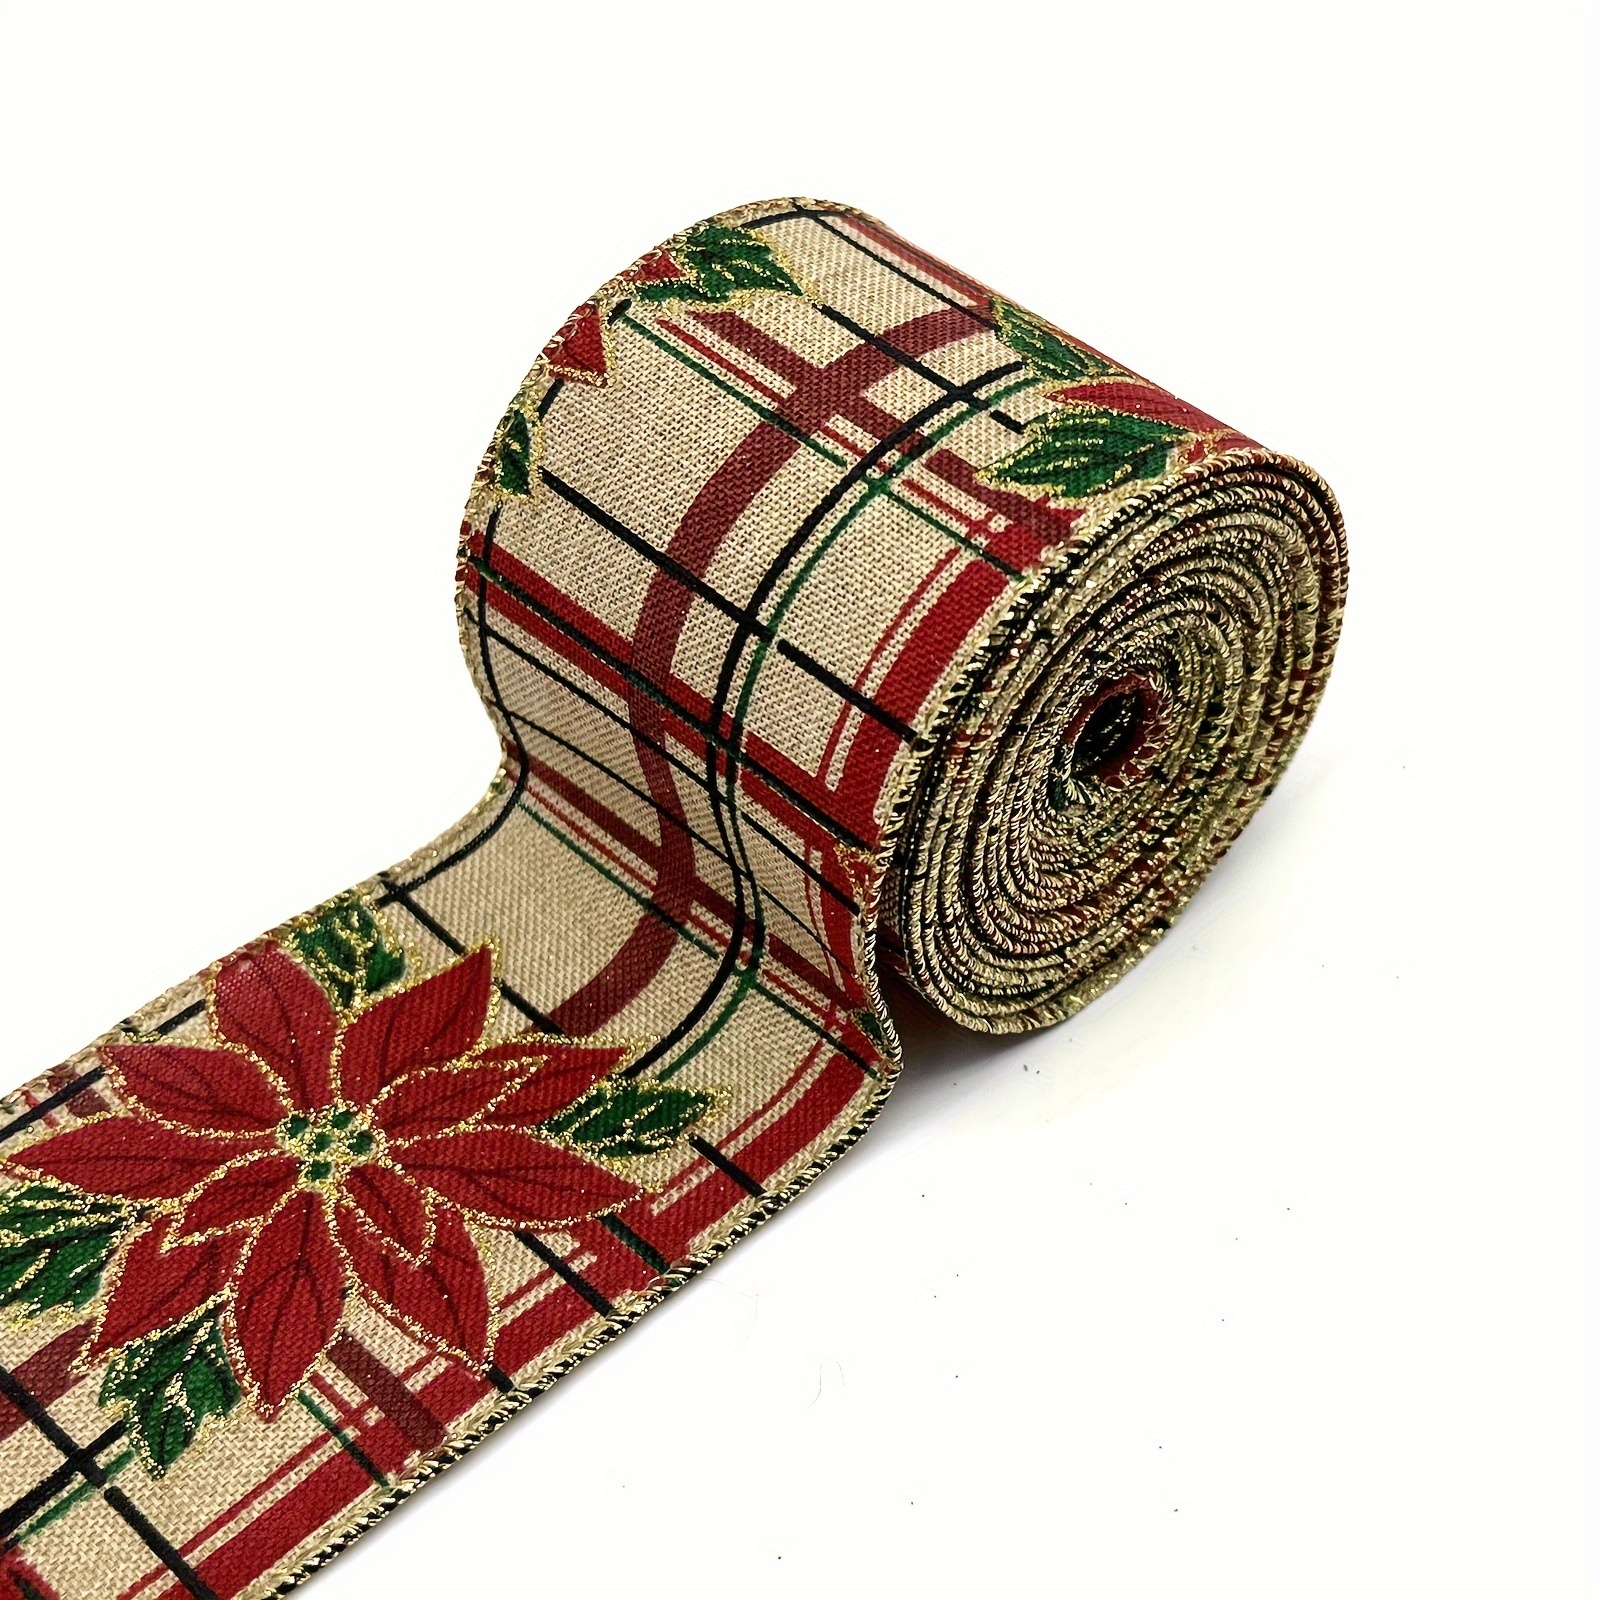 5 Meter Wide Christmas Ribbon for Gift Wrapping Wide Ribbons for